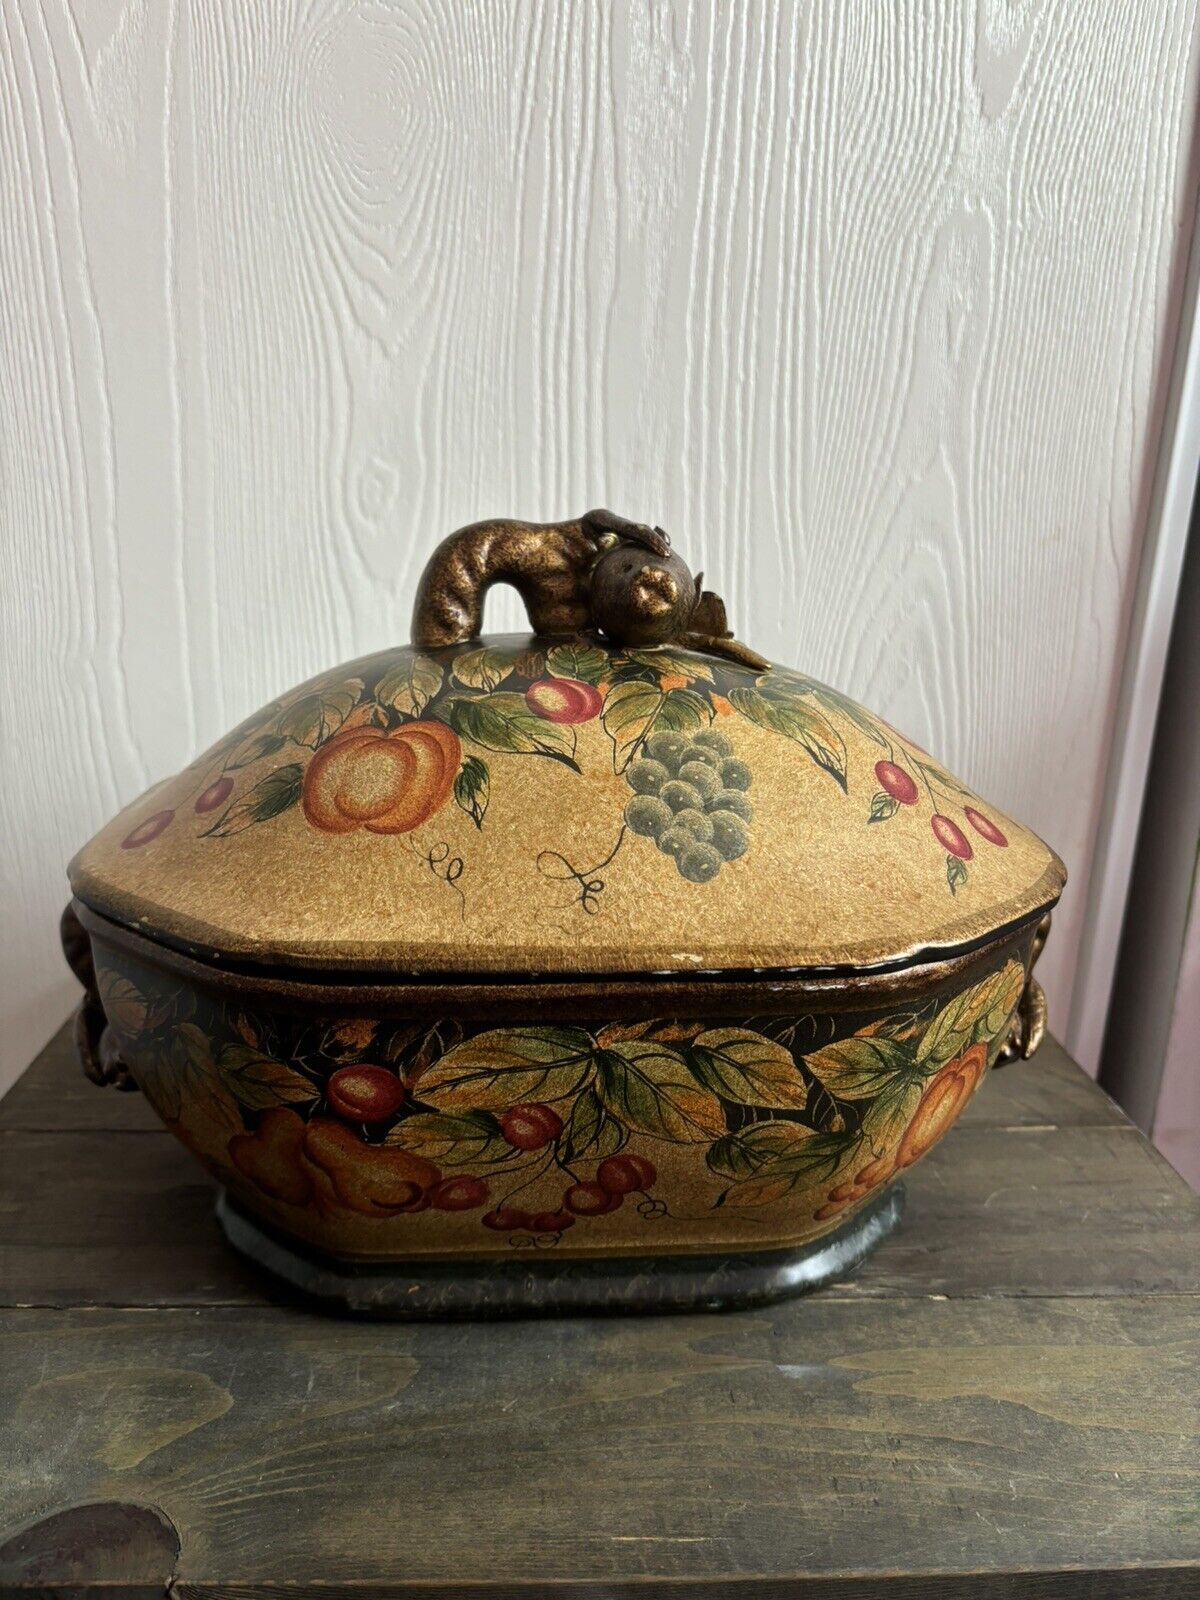 Vintage/Antique Rare Domain 8853 Decorative Tureen With Handles And Lid